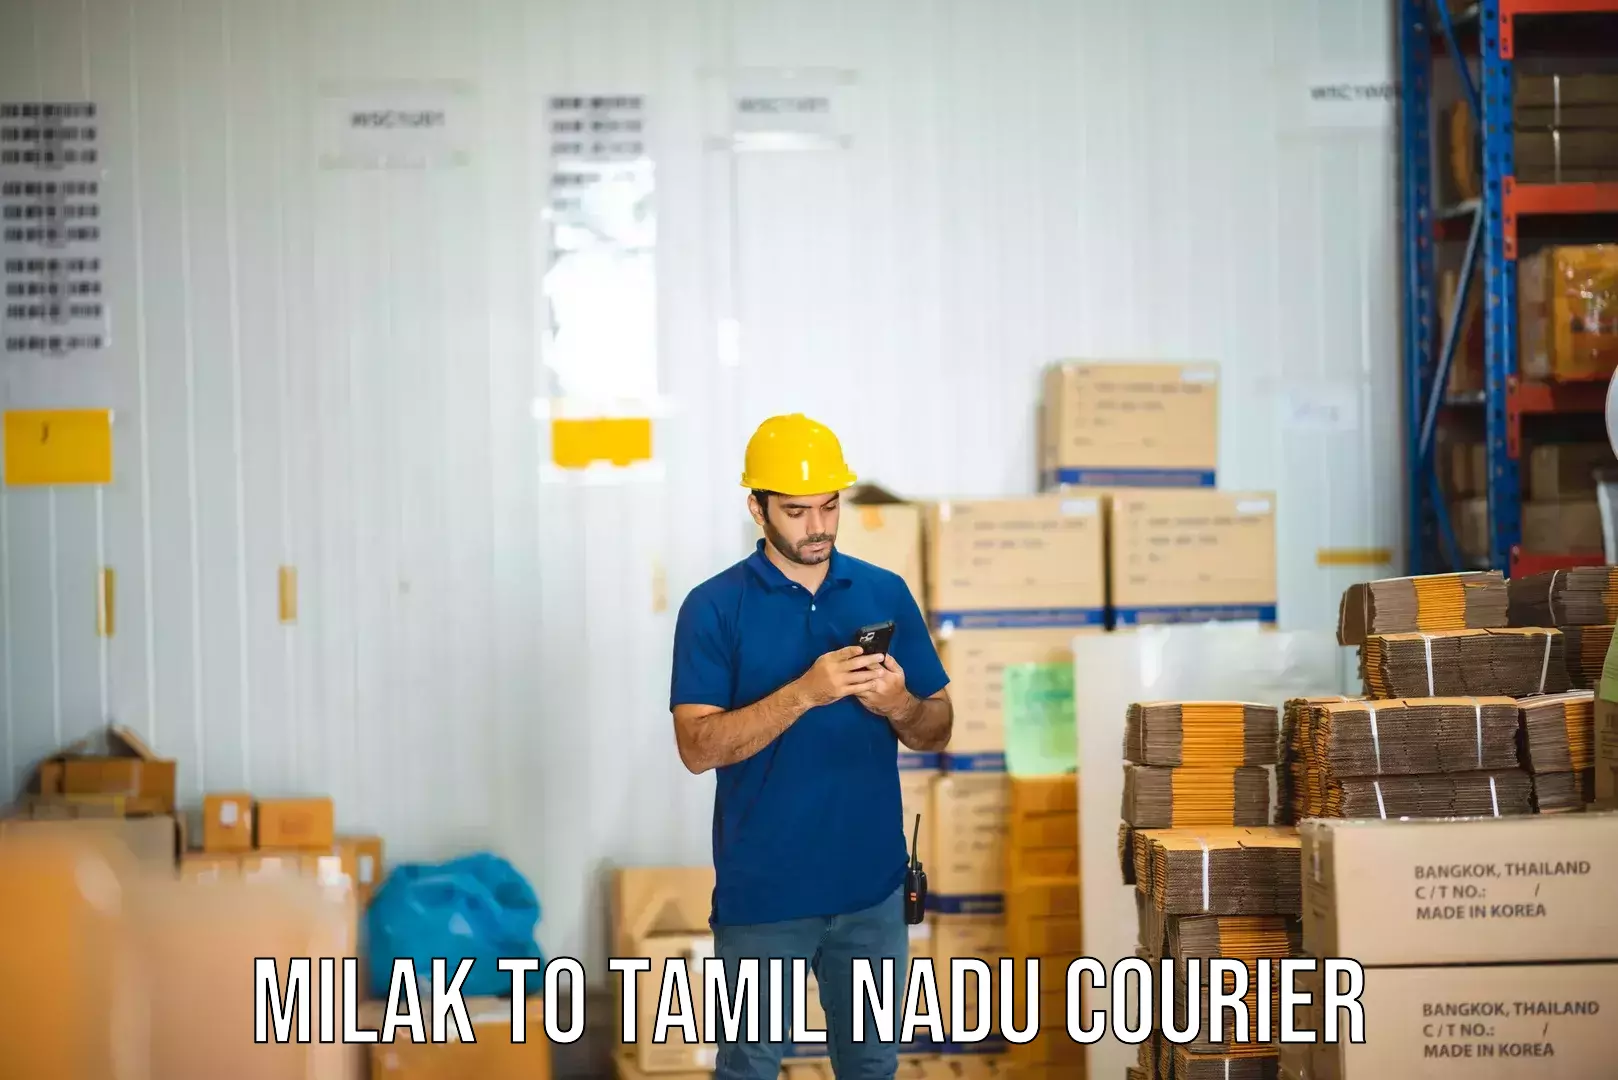 Courier service partnerships in Milak to Tamil Nadu